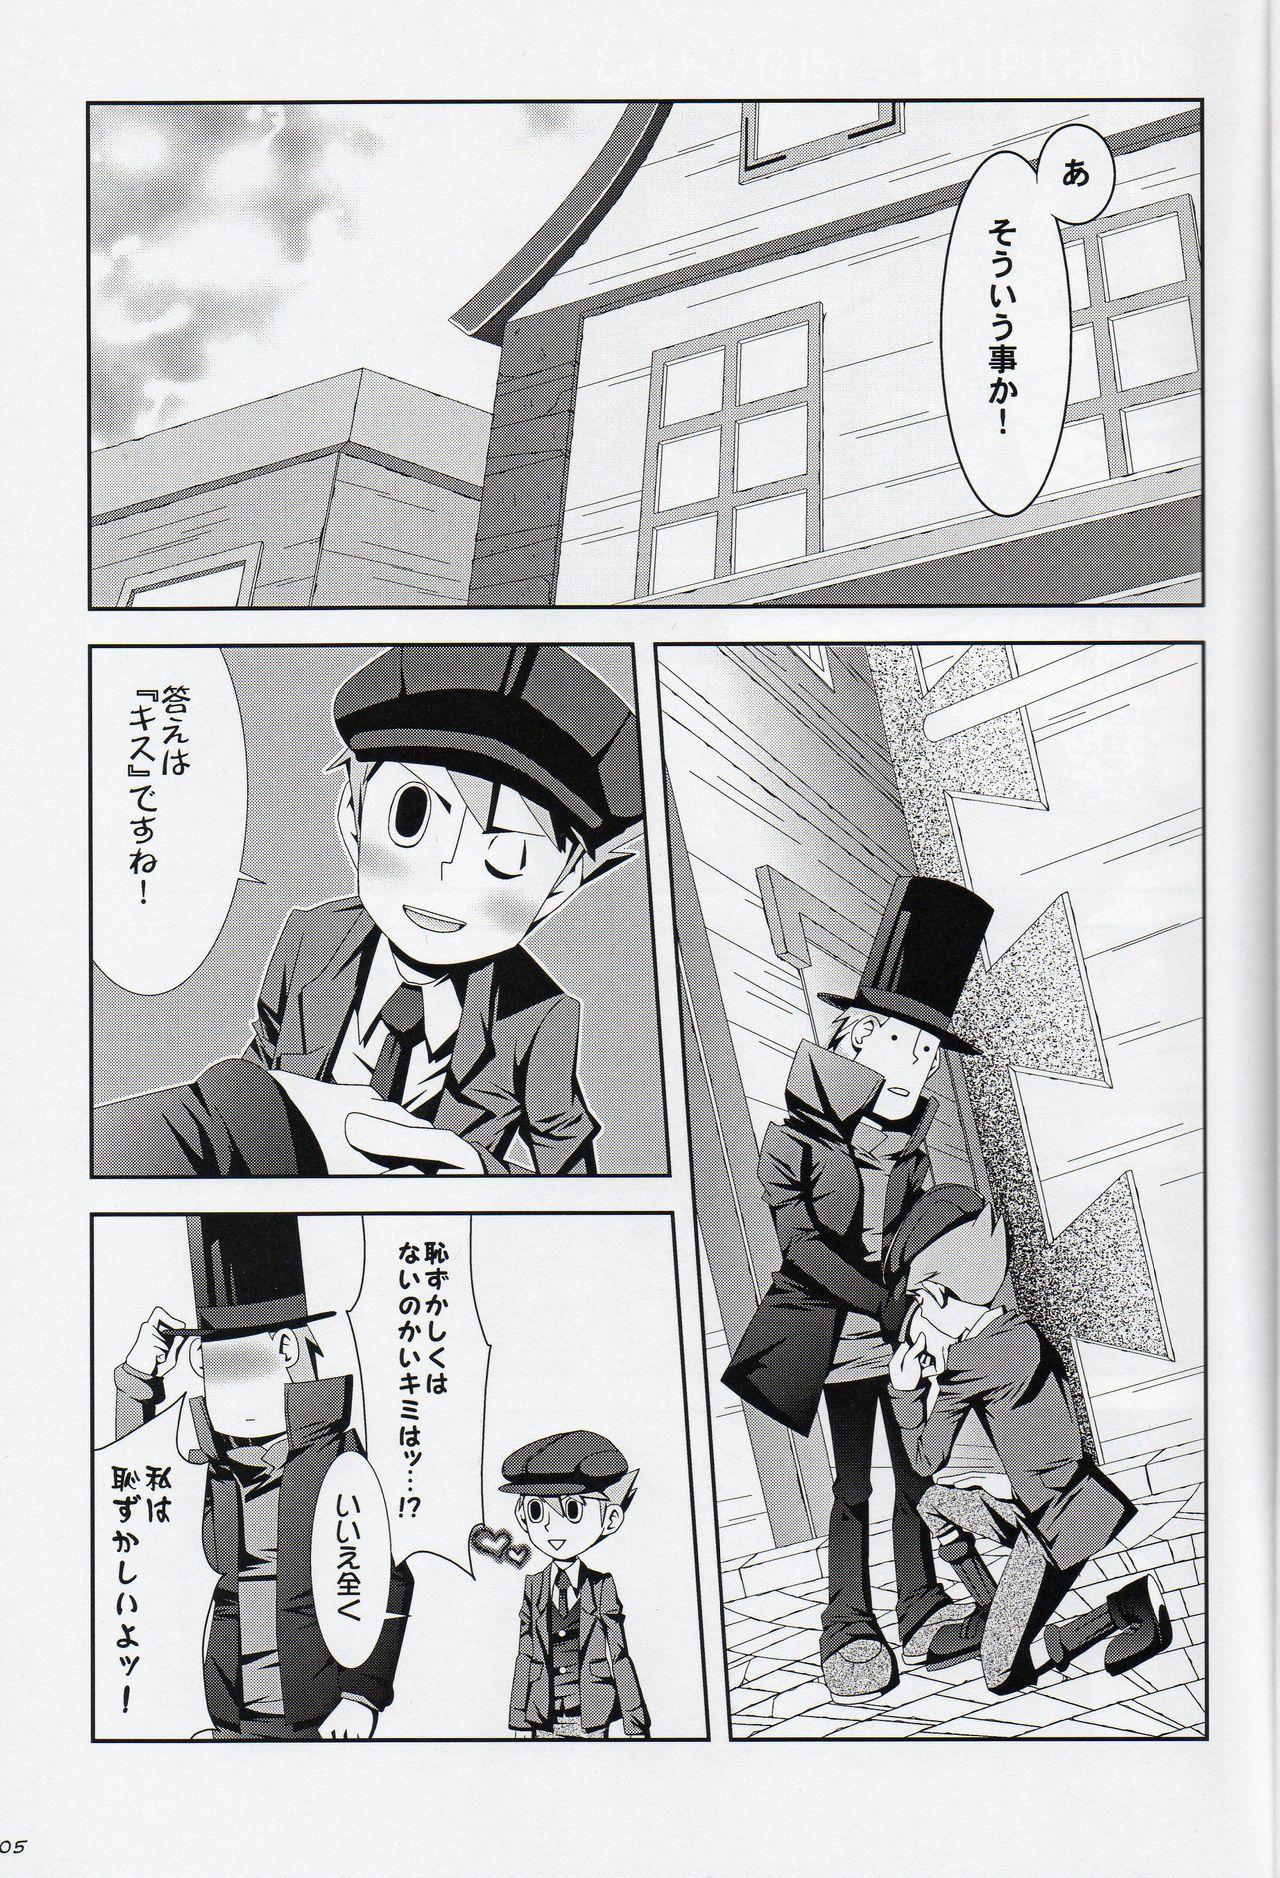 Naughty Puzzle - Professor layton Clit - Page 5